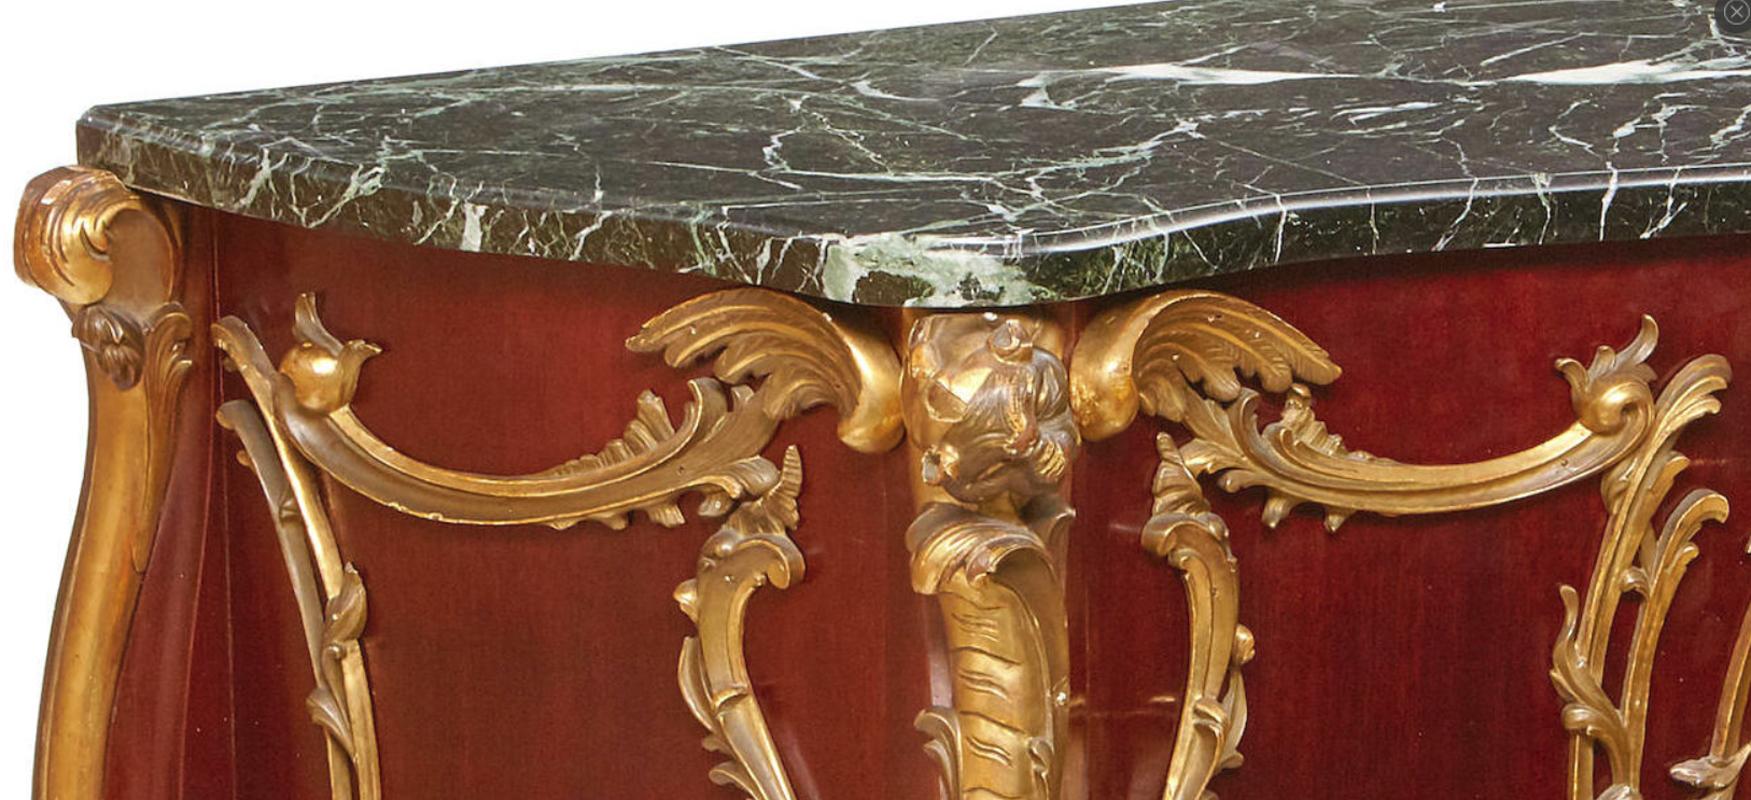 Unique and oversized French Louis XV style parcel carved-giltwood fruitwood commode-form console with marble top.
Late 19th-early 20th century. Possibly Italian.
The beautiful serpentine-fronted green marble top is over a bombe commode-form console.